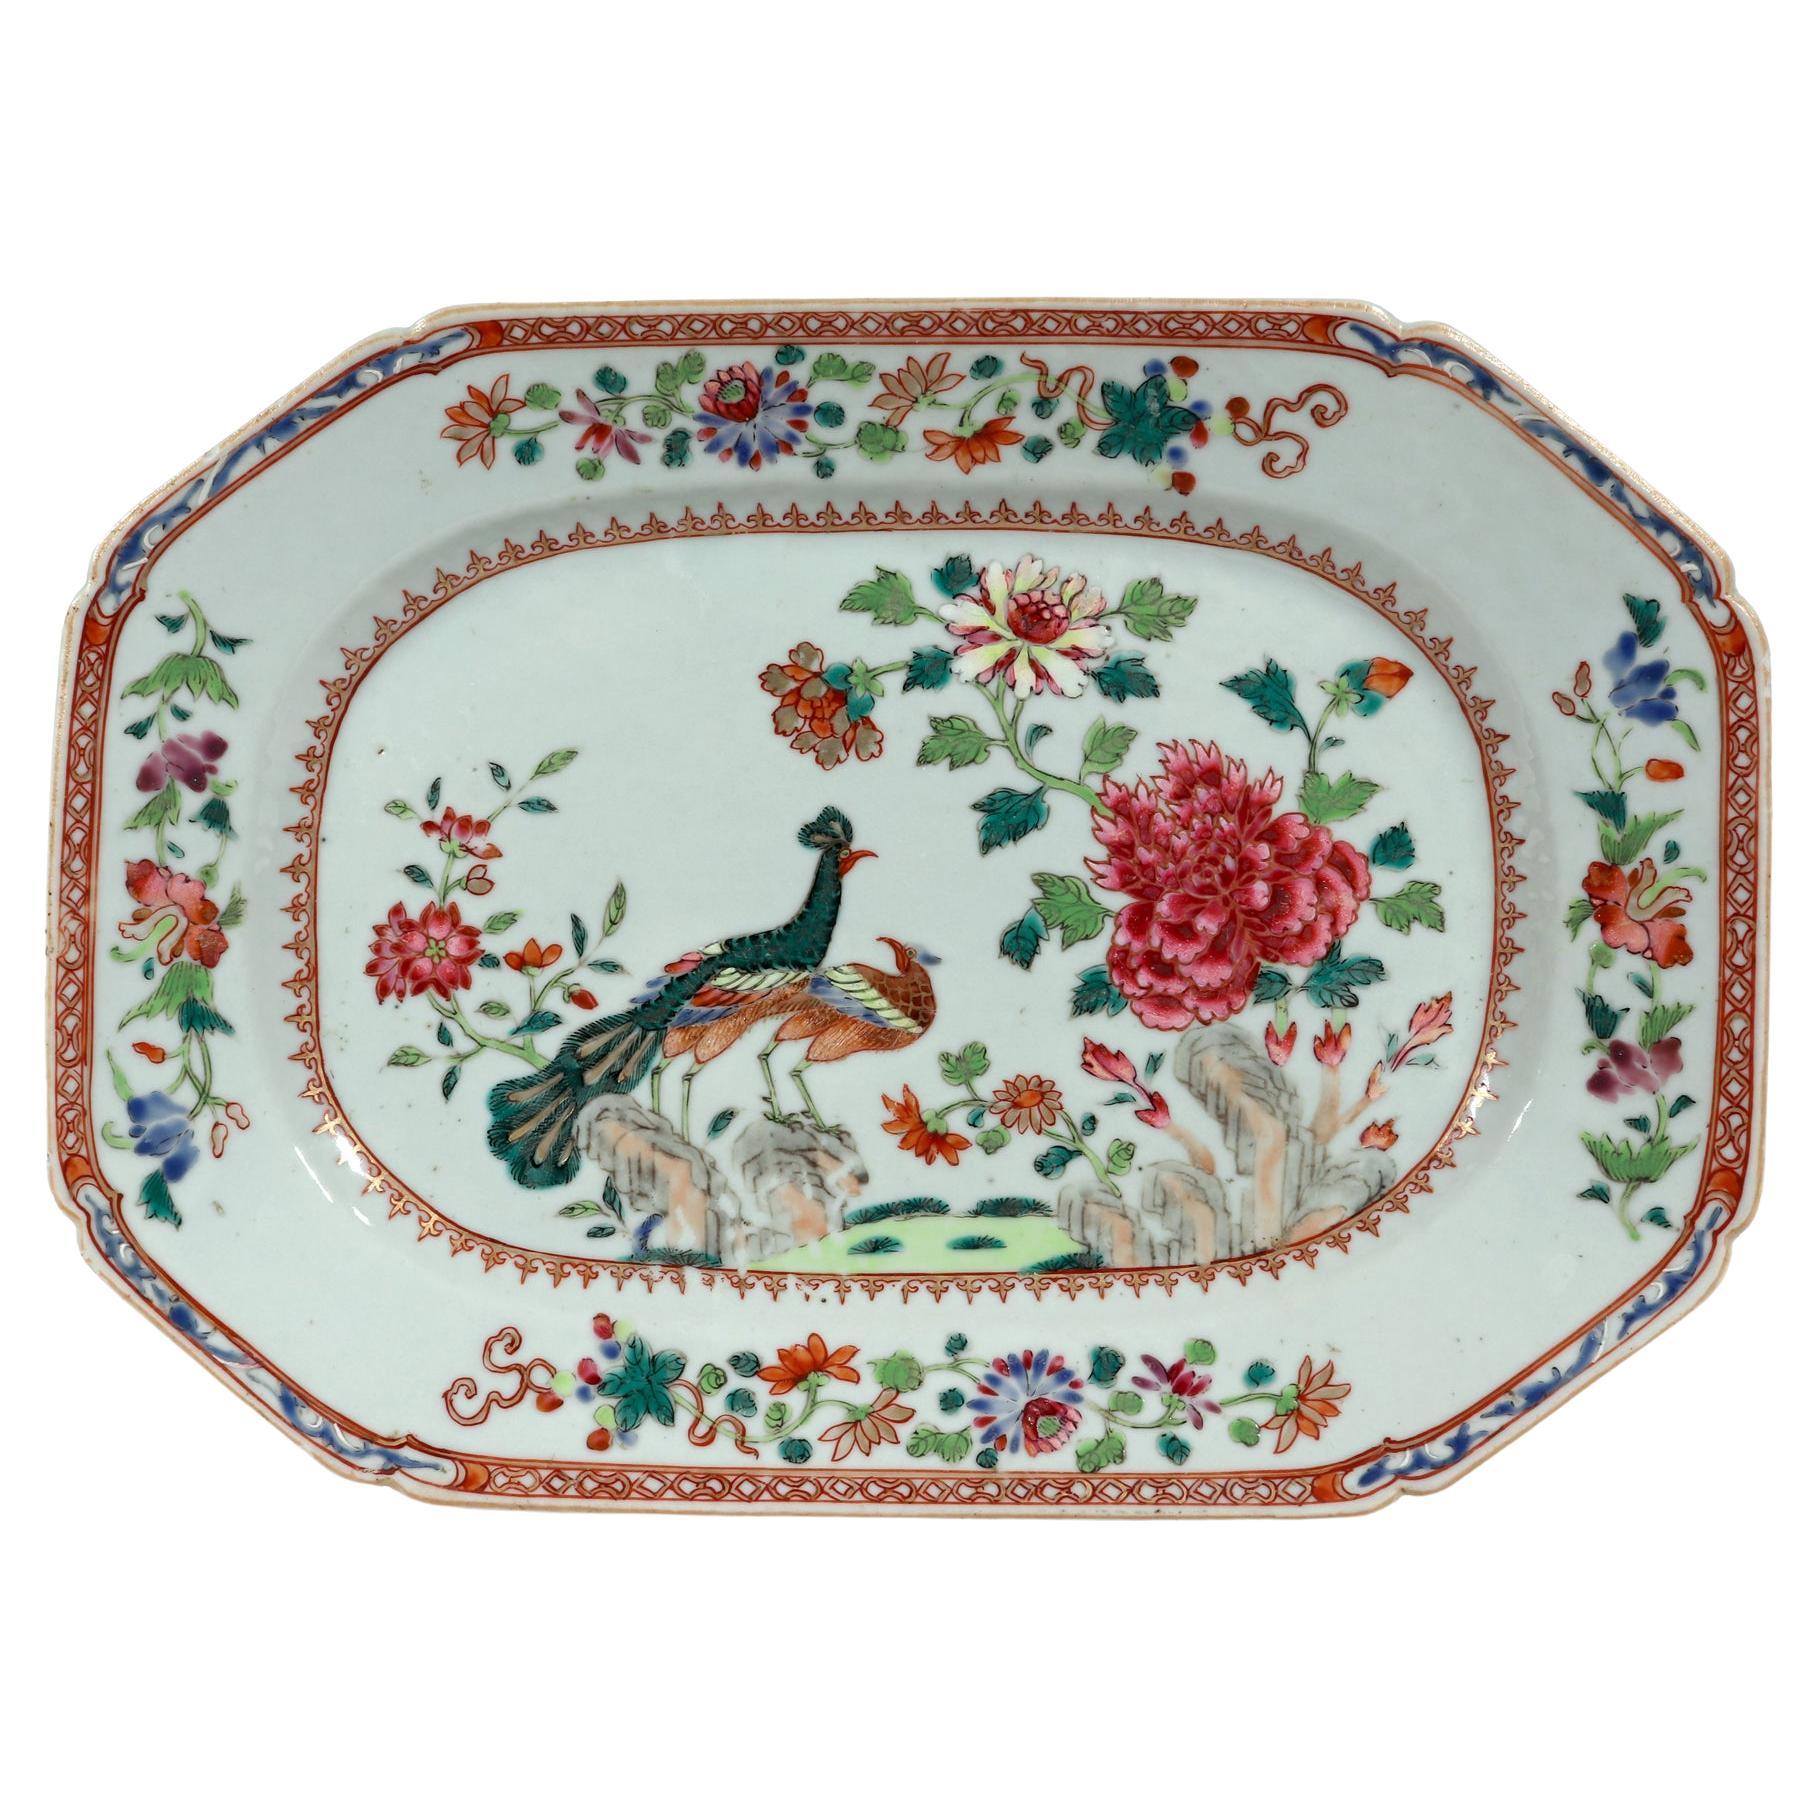 Chinese Export Porcelain Famille Rose "Double Peacock" Dish